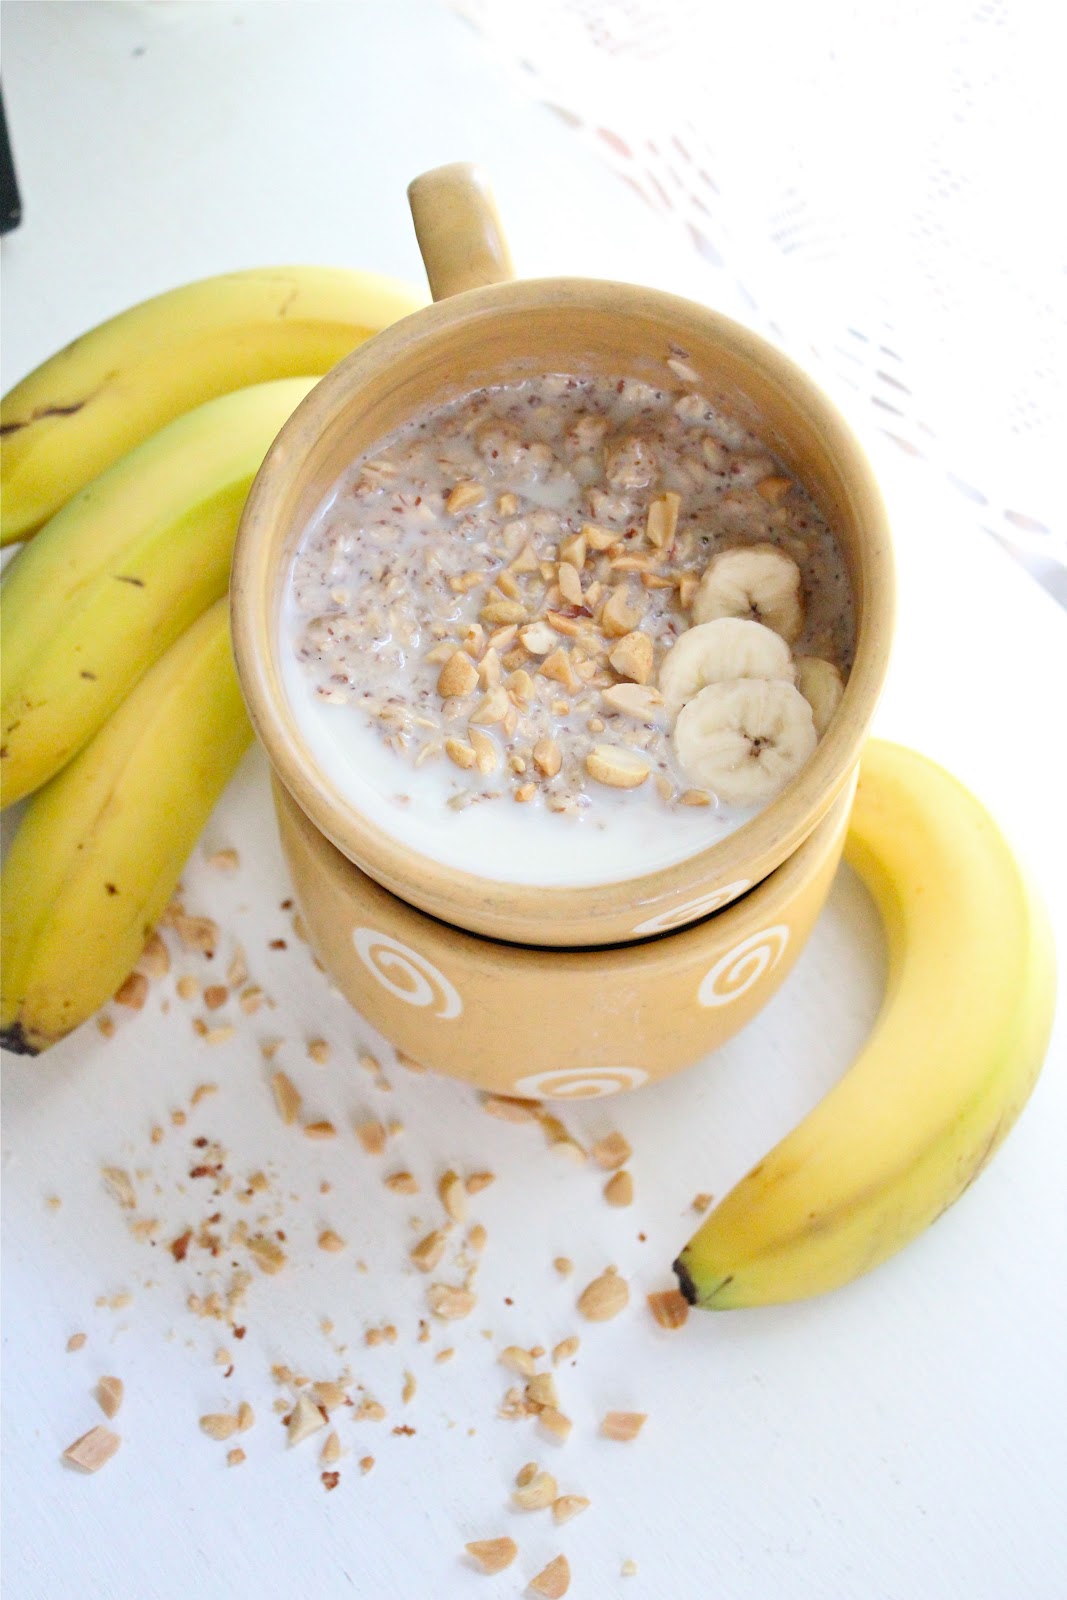 is oatmeal and peanut butter good for you